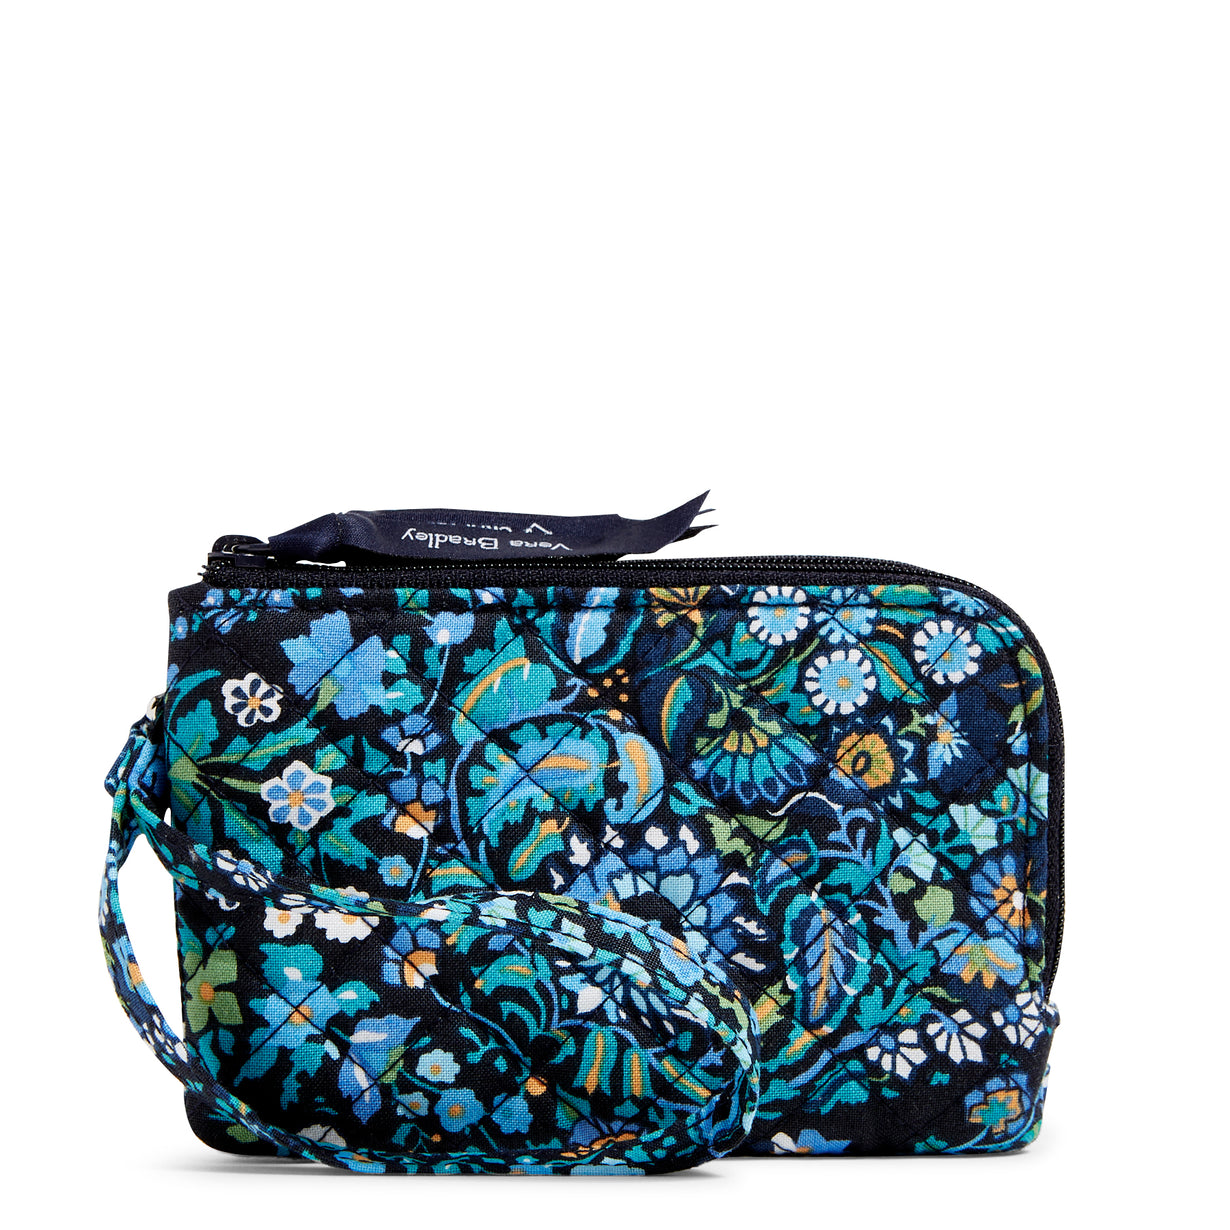 A Vera Bradly RFID Double Zip ID in Dreamer Paisley pattern.